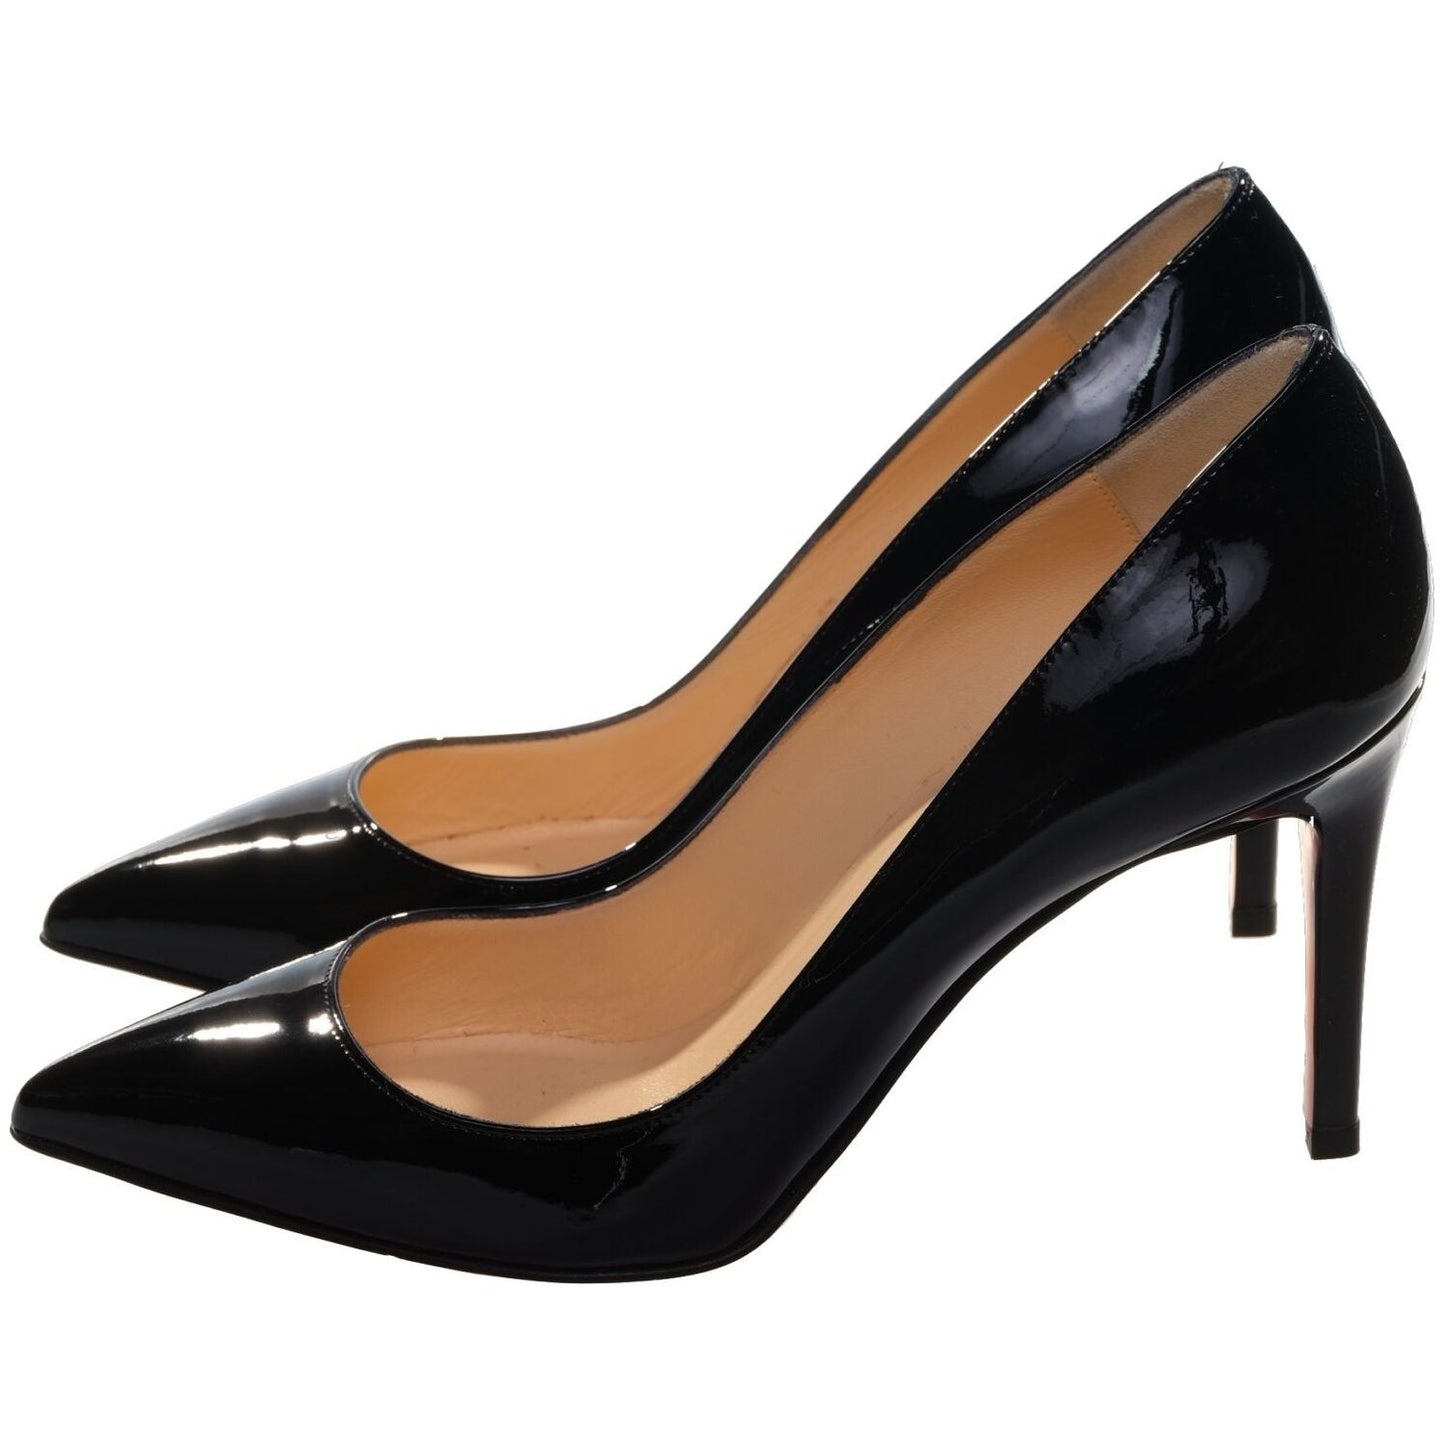 Christian Louboutin Pigalle 85 Black Leather High Heel Pumps pigalle-85-black-leather-high-heel-pumps